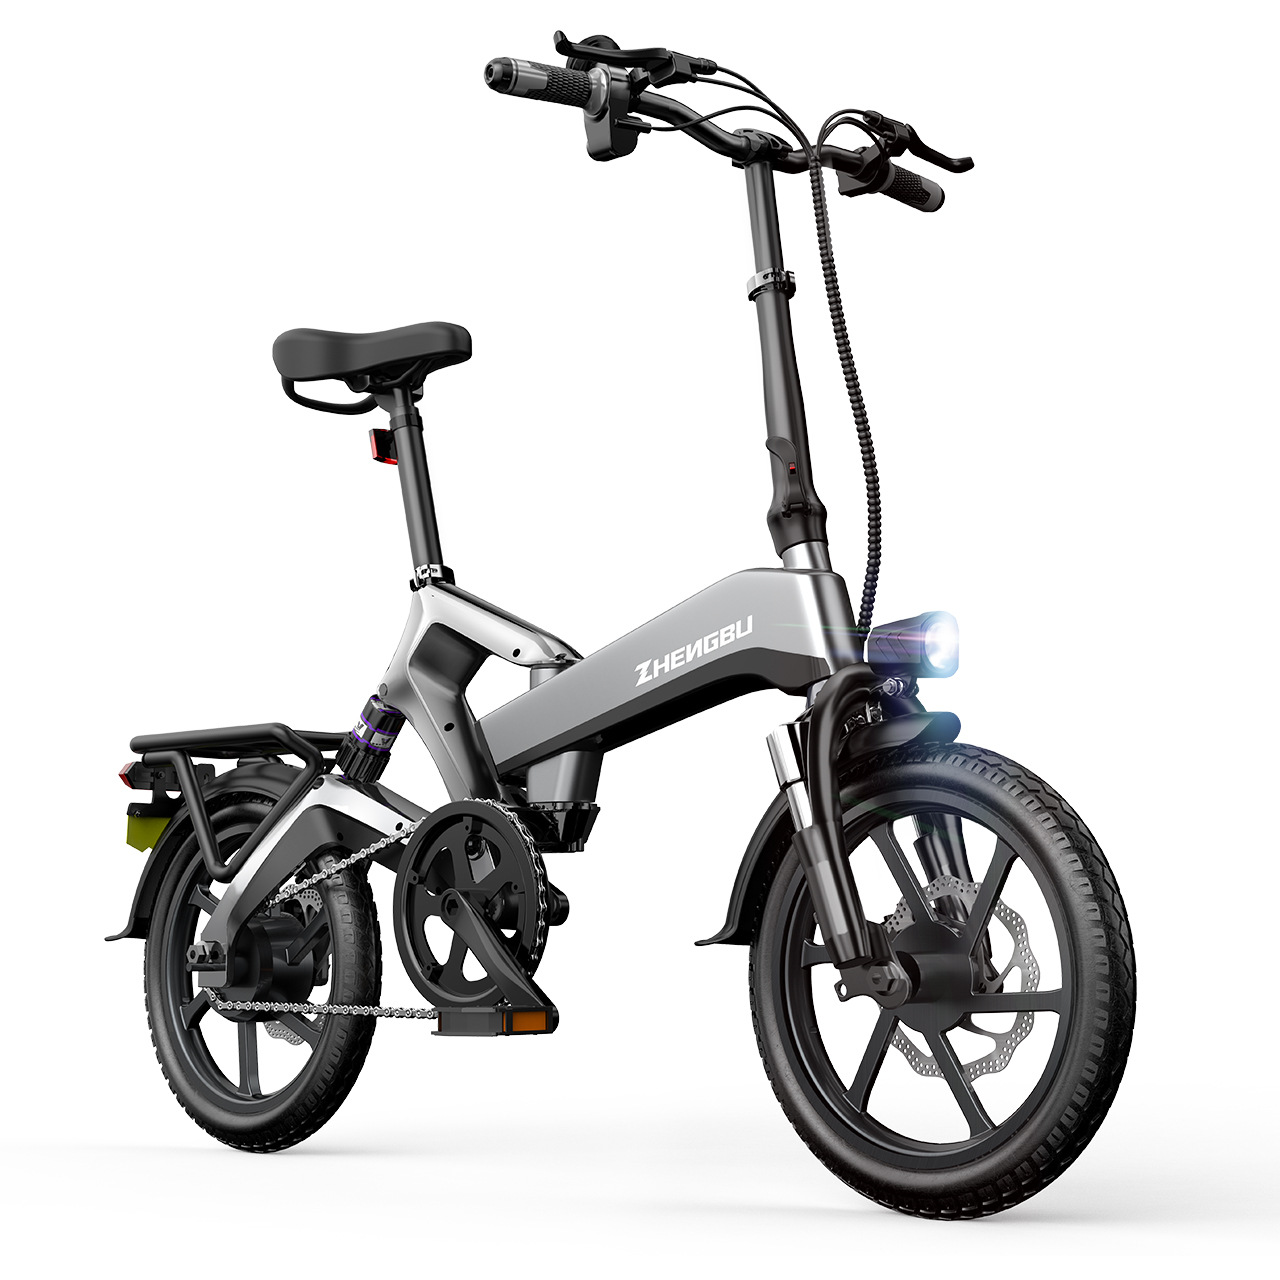 Zhengbu Folding Small Power Scooter New National Standard Men and Women Ultra-Light Magnesium Alloy Lithium Electric Car Electric Bicycle